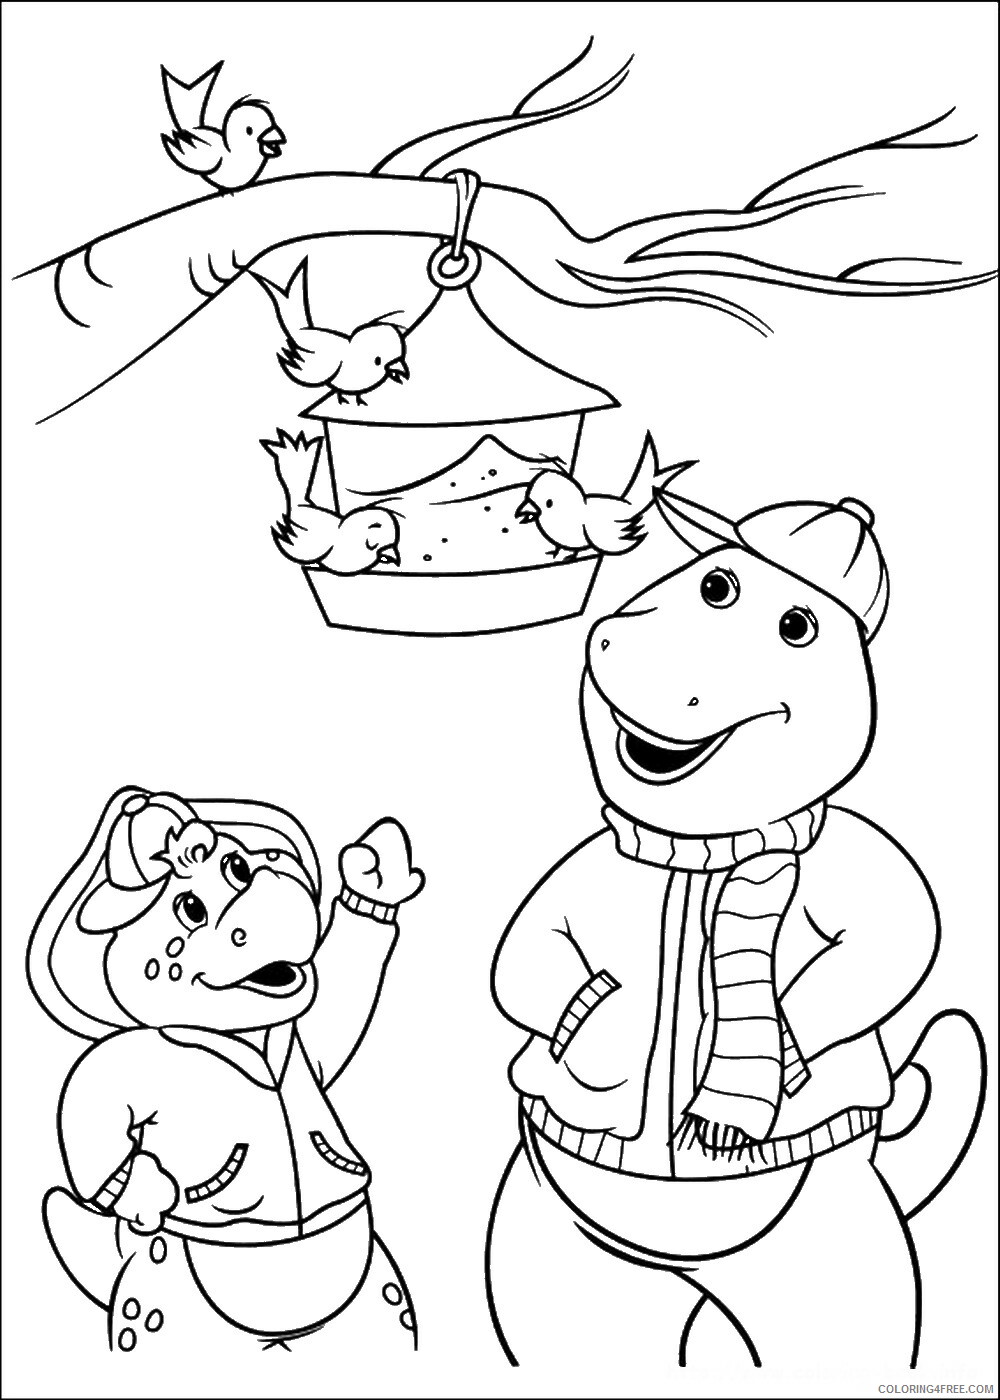 Barney and Friends Coloring Pages TV Film barney_cl_1053 Printable 2020 00626 Coloring4free